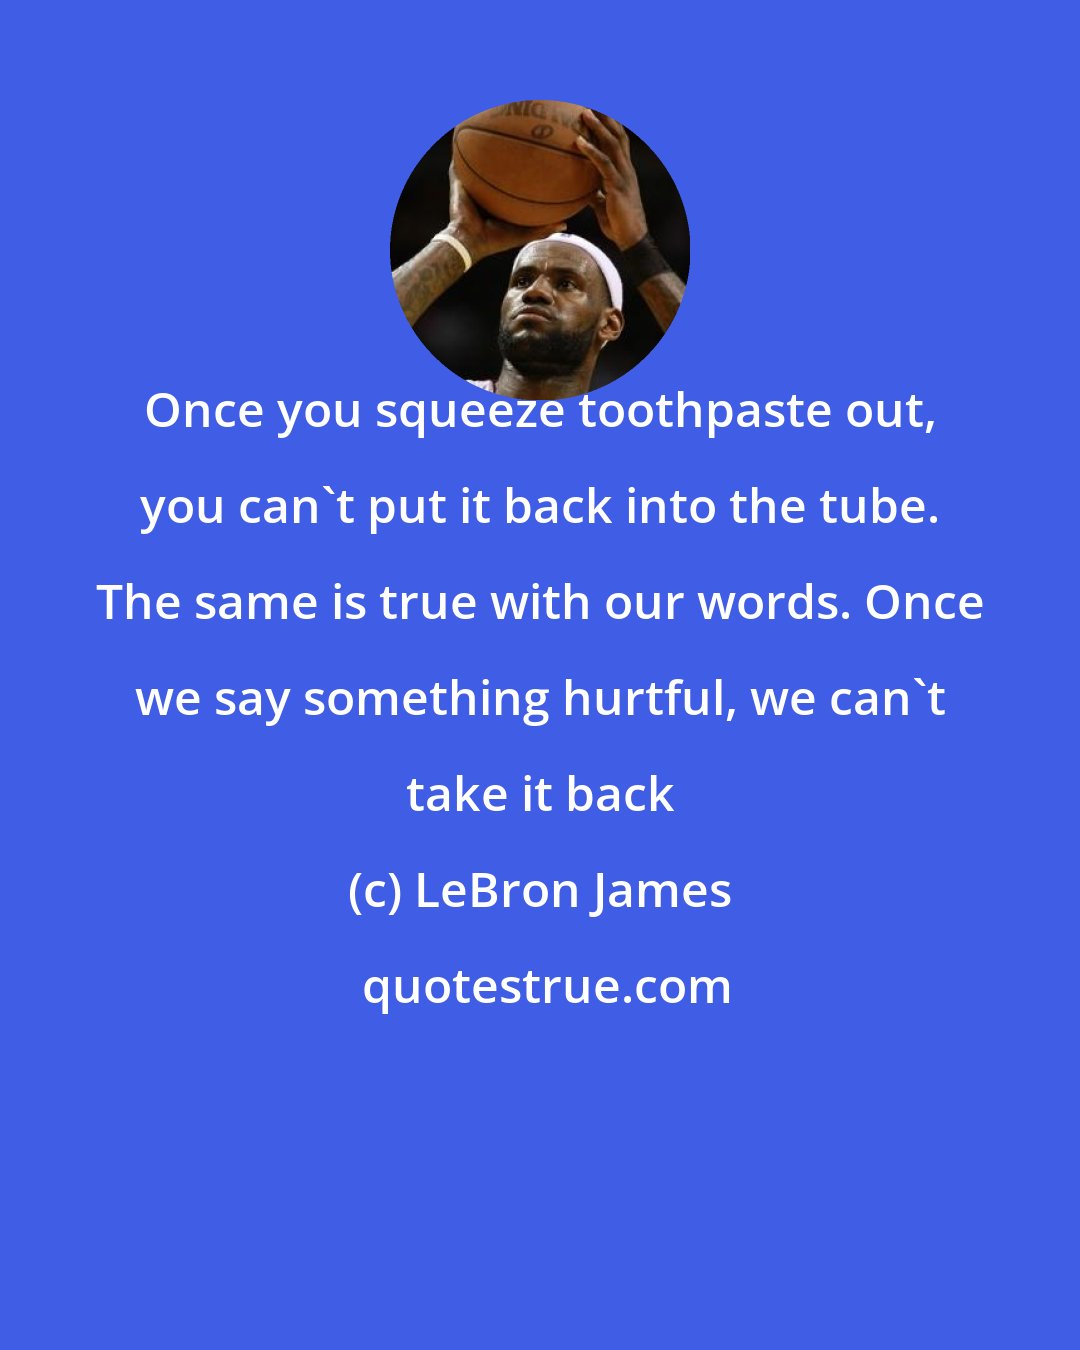 LeBron James: Once you squeeze toothpaste out, you can't put it back into the tube. The same is true with our words. Once we say something hurtful, we can't take it back